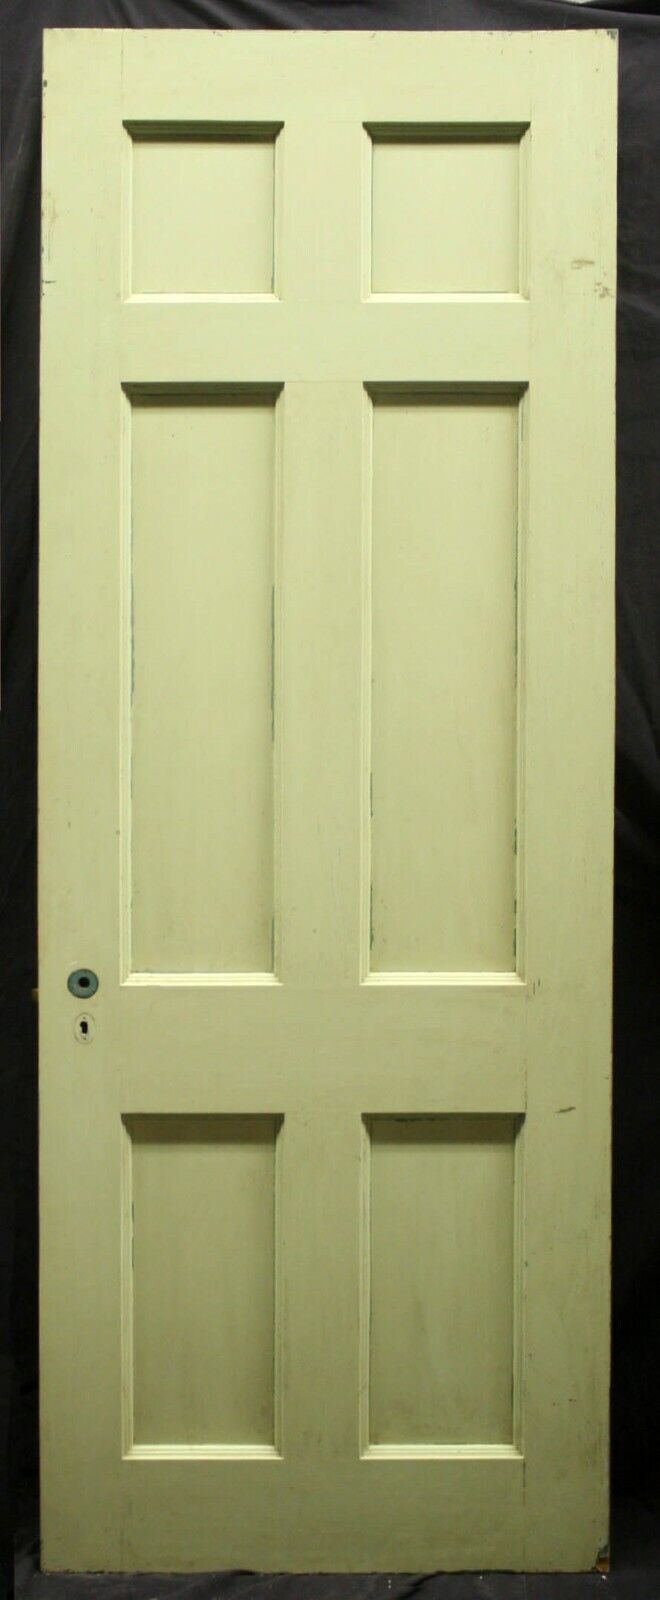 30"x83"x1.75" Antique Vintage Old Reclaimed Salvaged Solid Wood Interior Pantry Door 6 Flat Panels